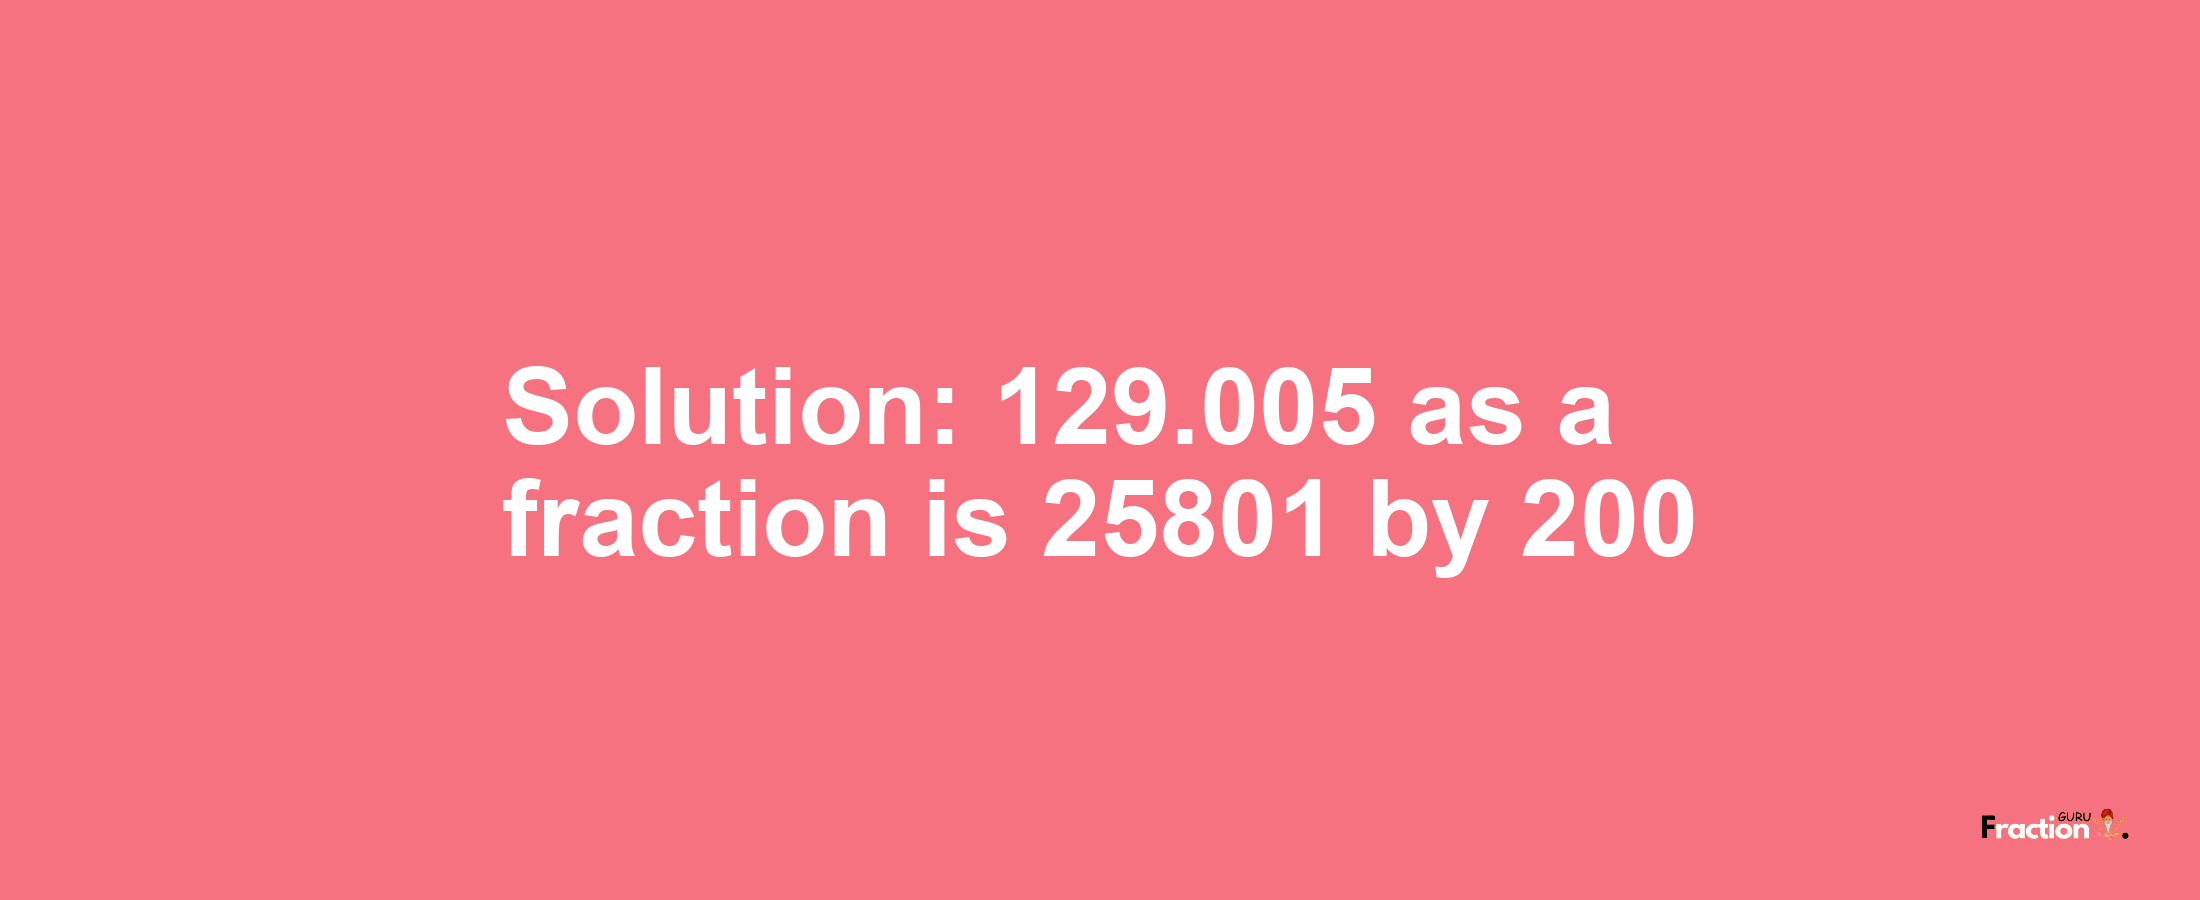 Solution:129.005 as a fraction is 25801/200